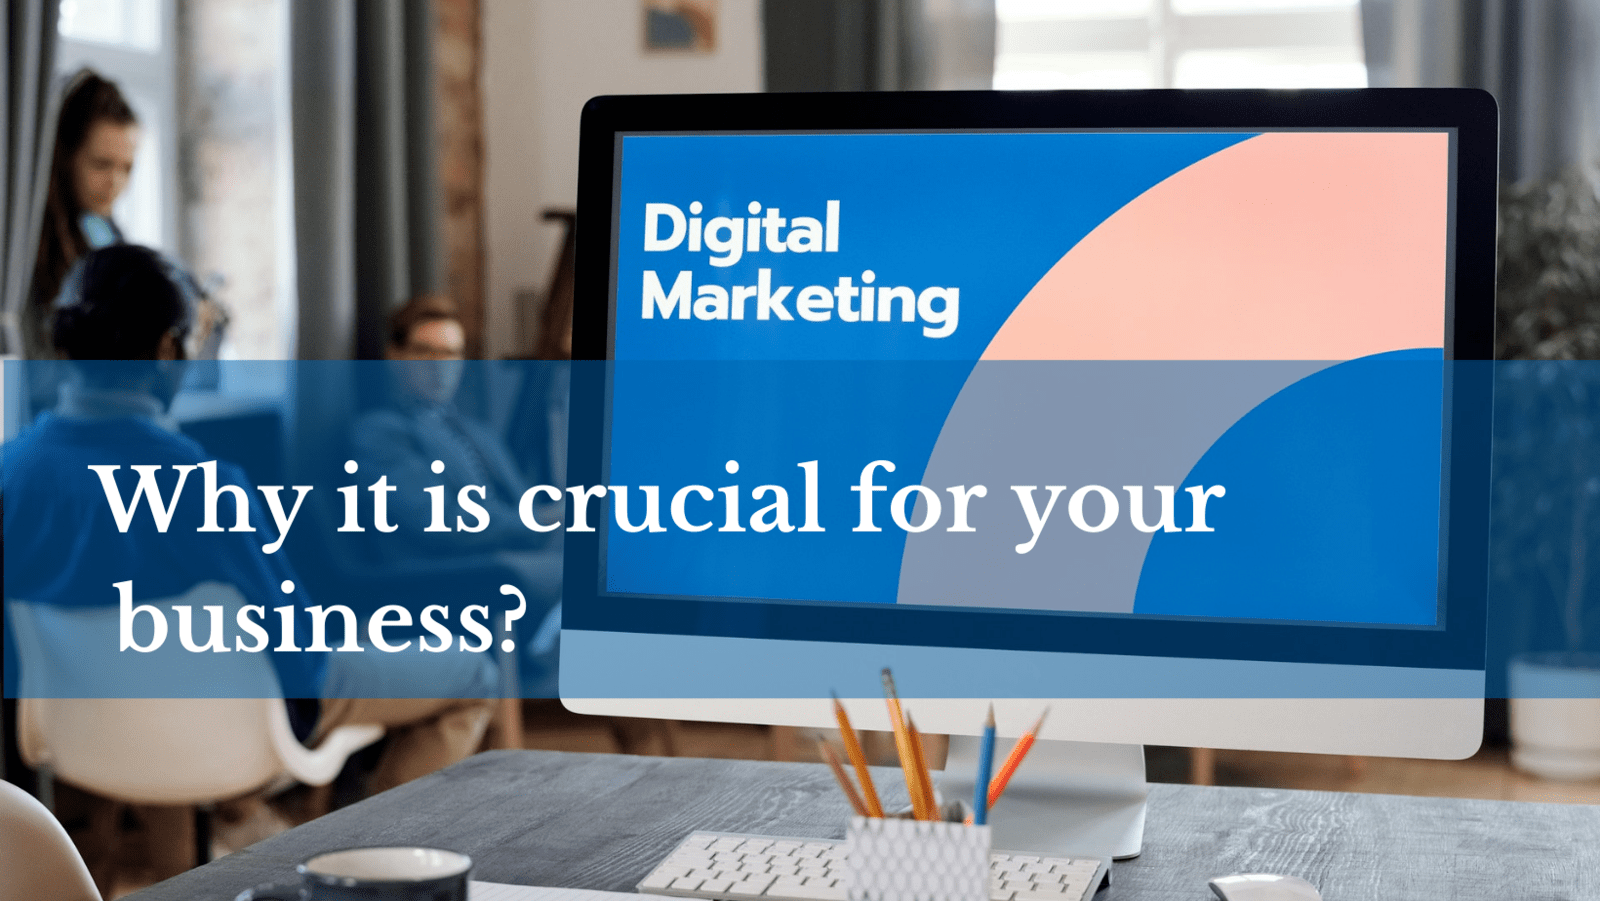 Why is Digital Marketing crucial for your business?